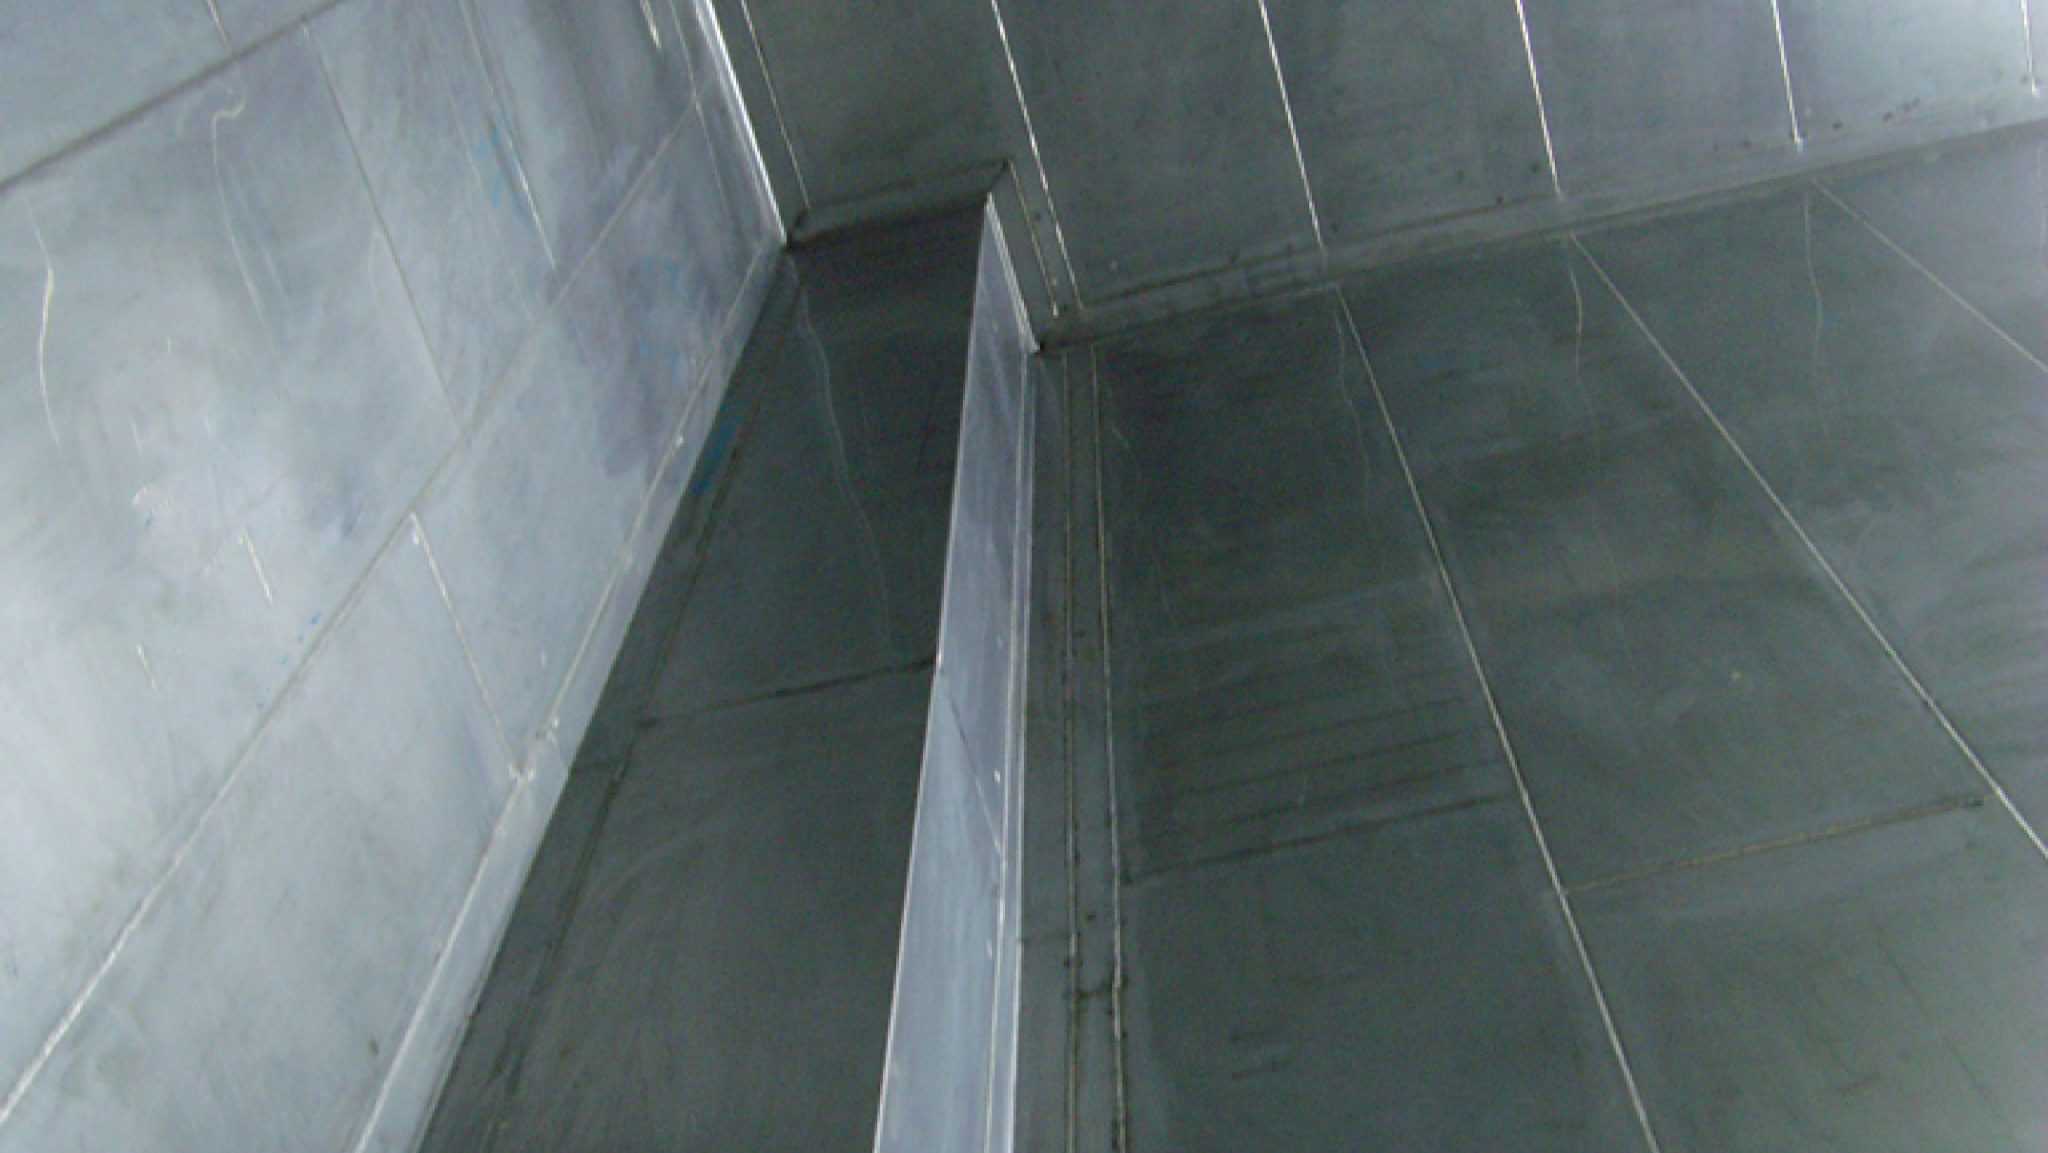 Stainless Steel Lining System by Sunnik Trusted Liquid Storage Panel Tank Supplier